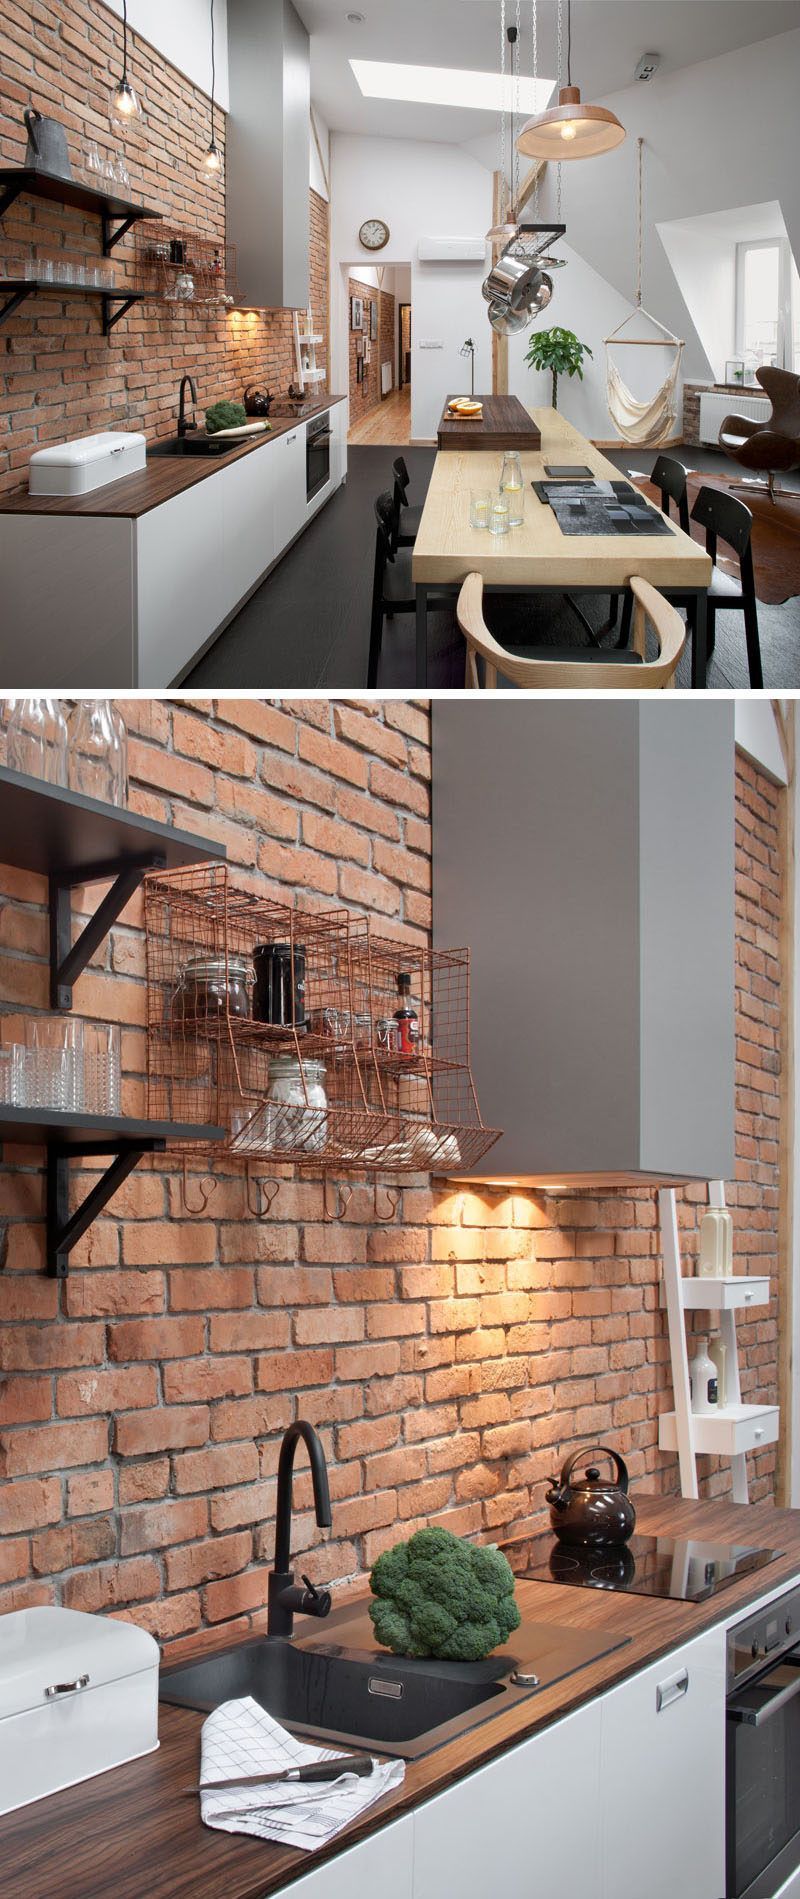 Throughout the apartment there are bright white walls, touches of brick and wood,